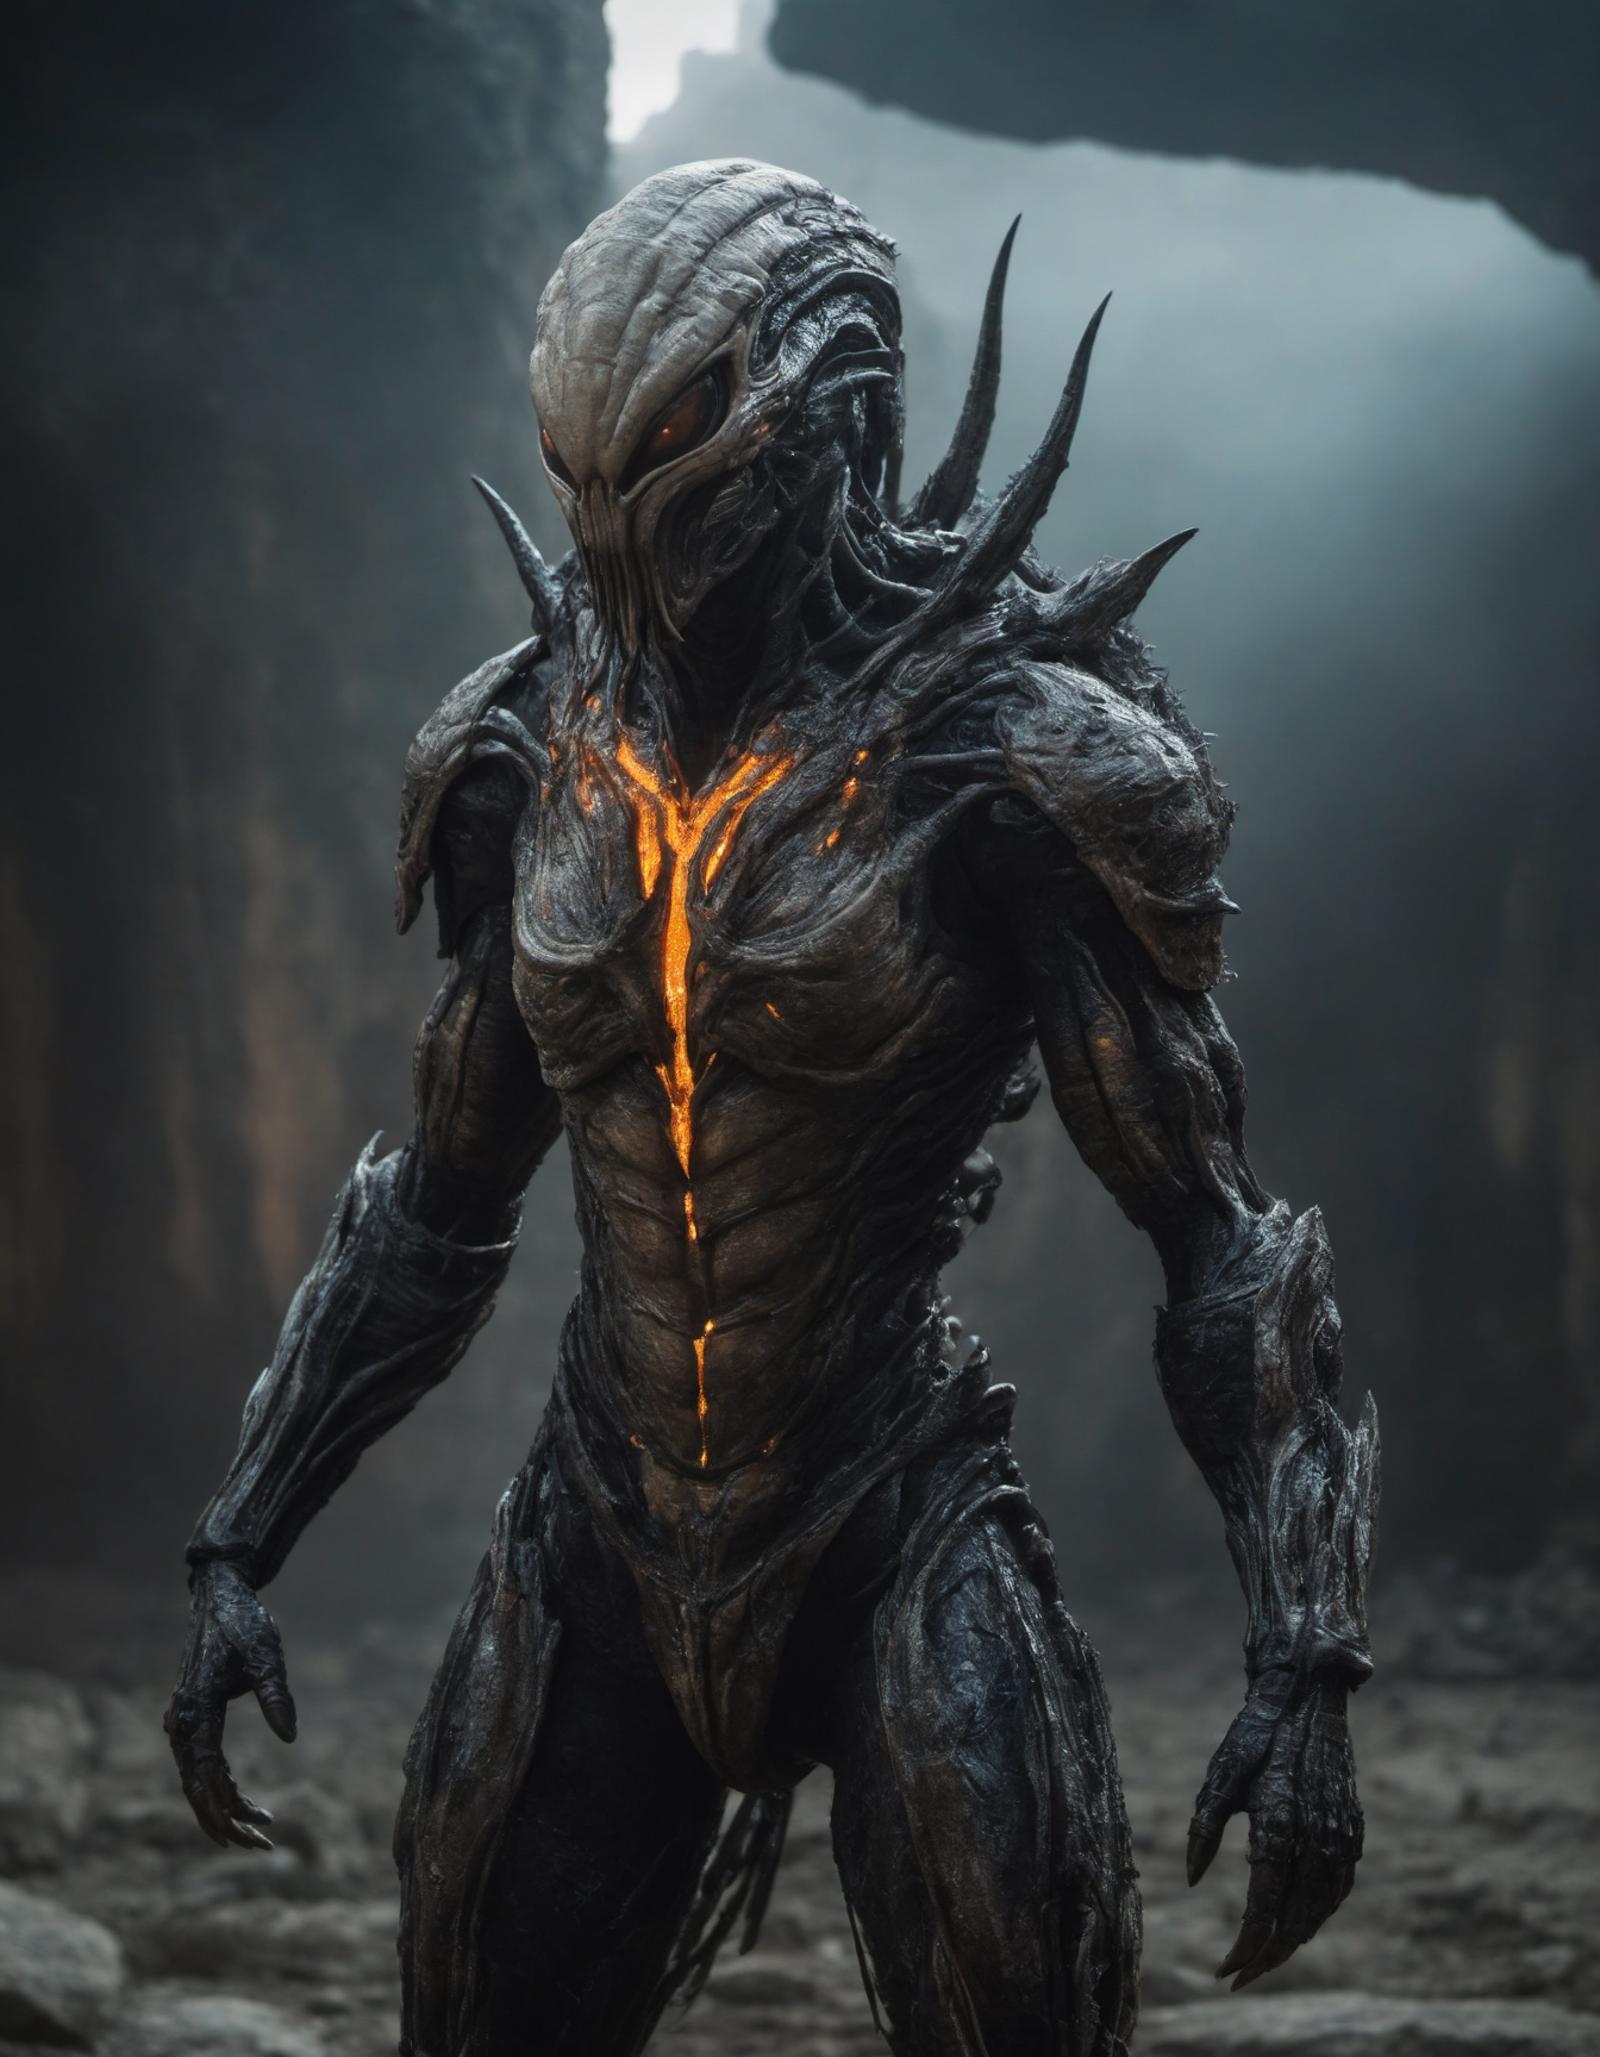 A dark, gritty, and intricately detailed image of a creature with multiple arms, possibly a robot or alien, standing in a dark environment surrounded by rocks and a cave. The creature appears to be the main focus of the image, with its impressive design and unique features.